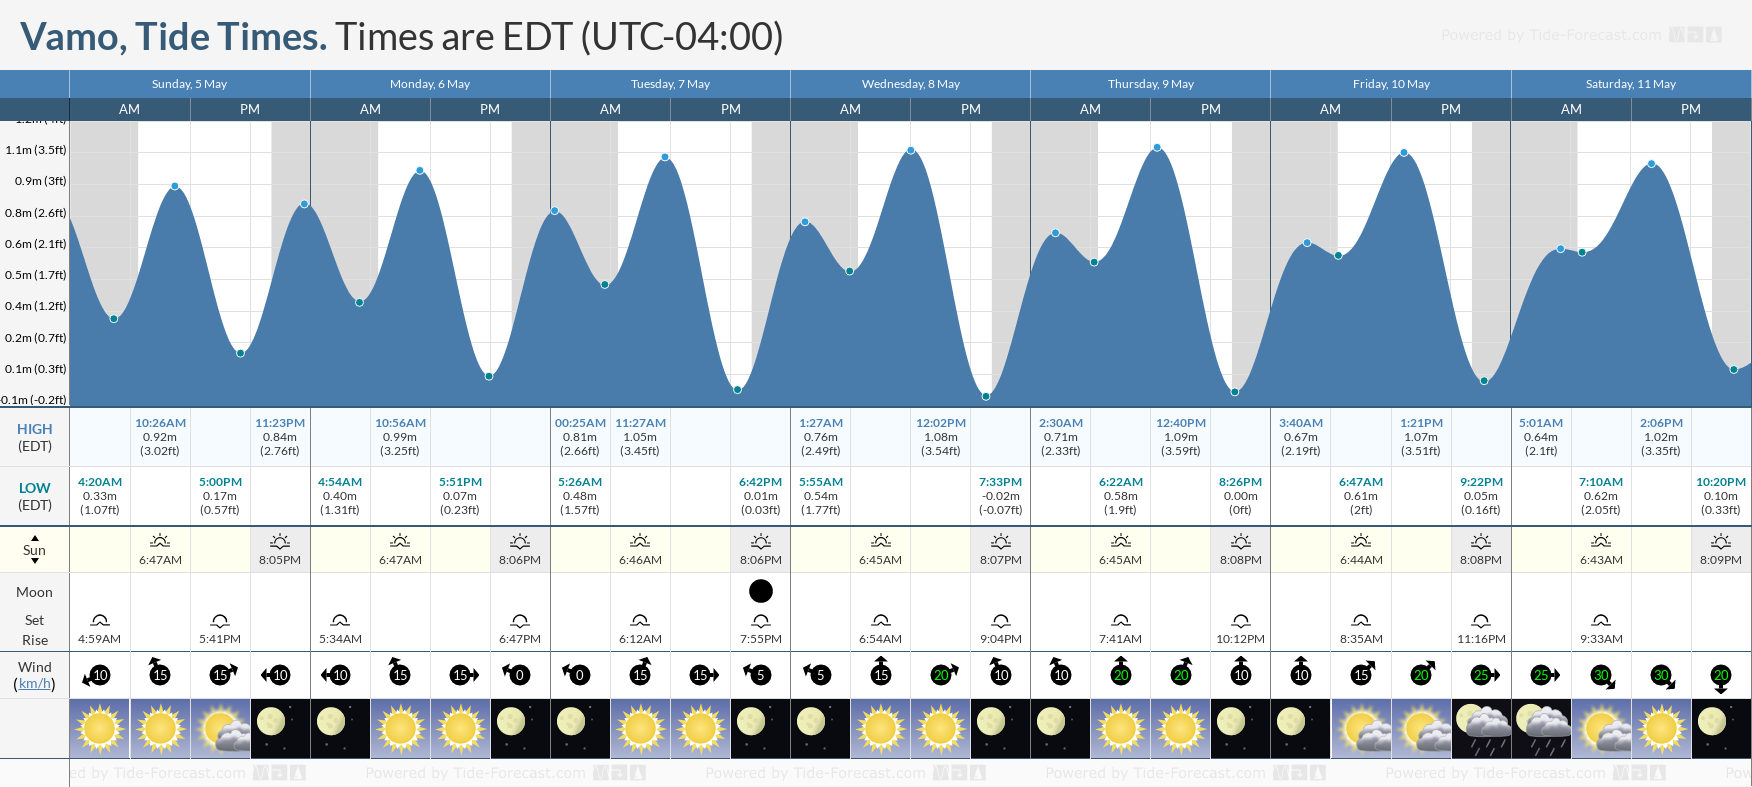 Vamo Tide Chart including high and low tide tide times for the next 7 days